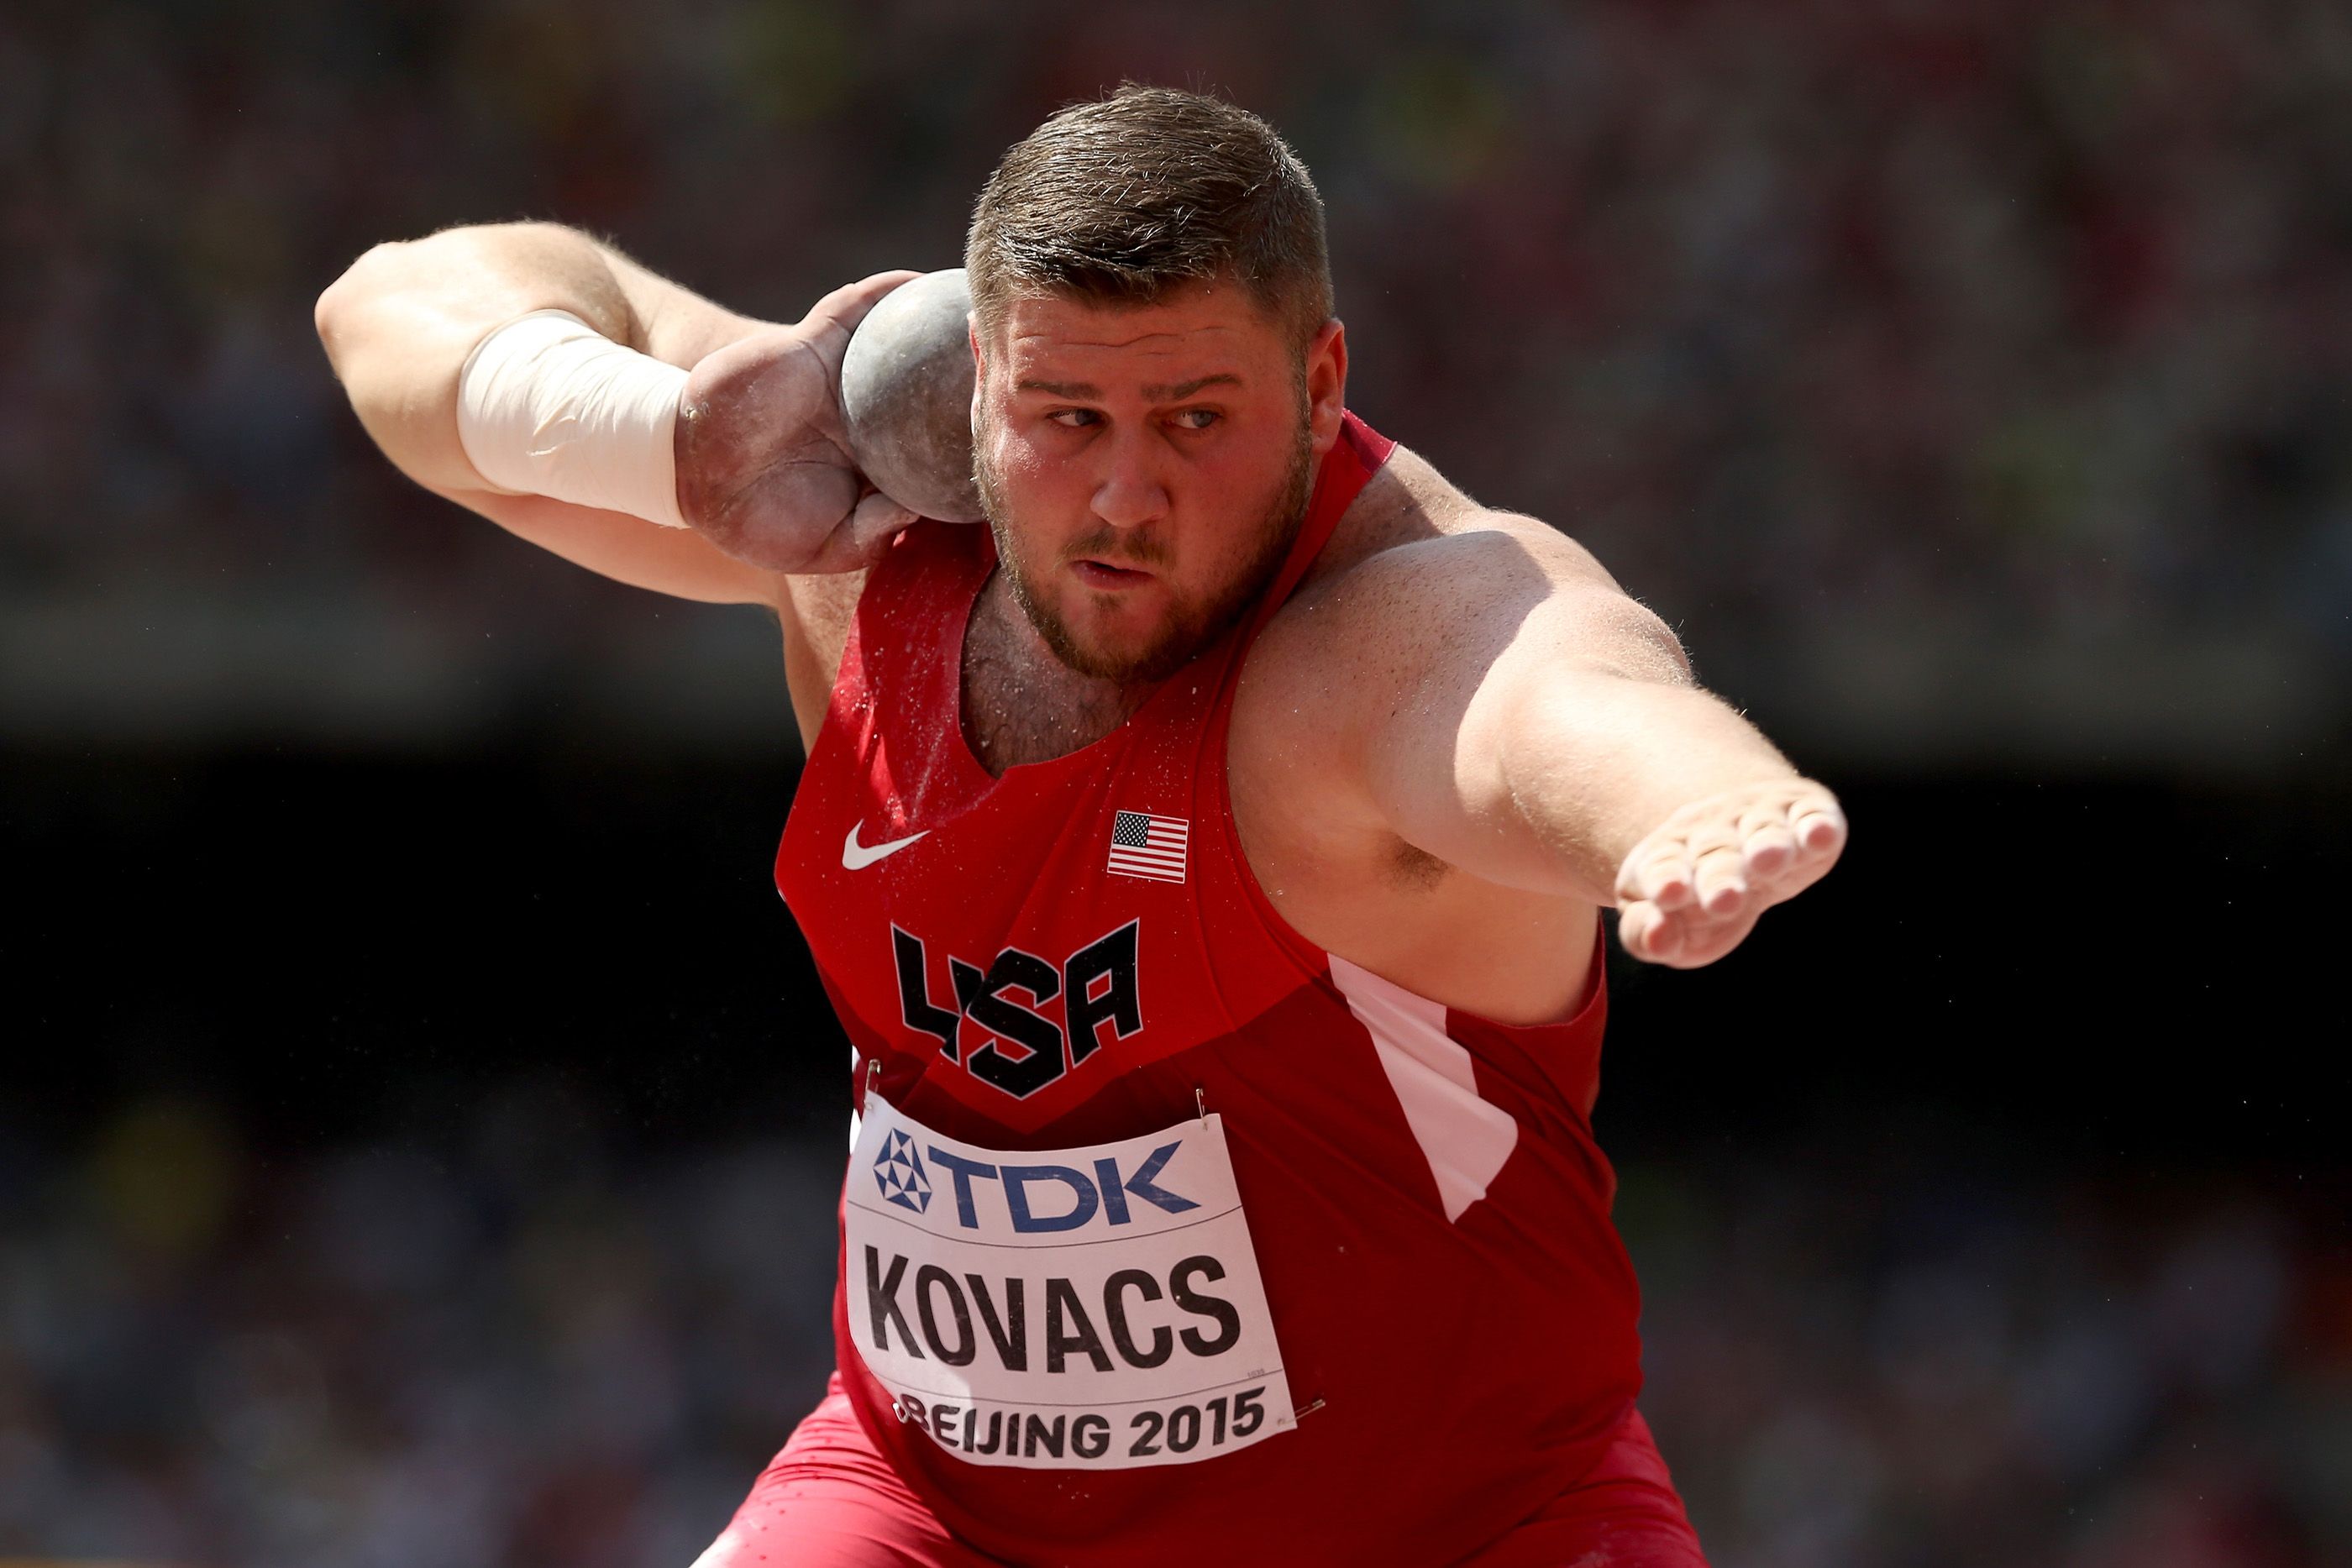 Joe Kovacs competes at the 2015 World Athletics Championships in Beijing